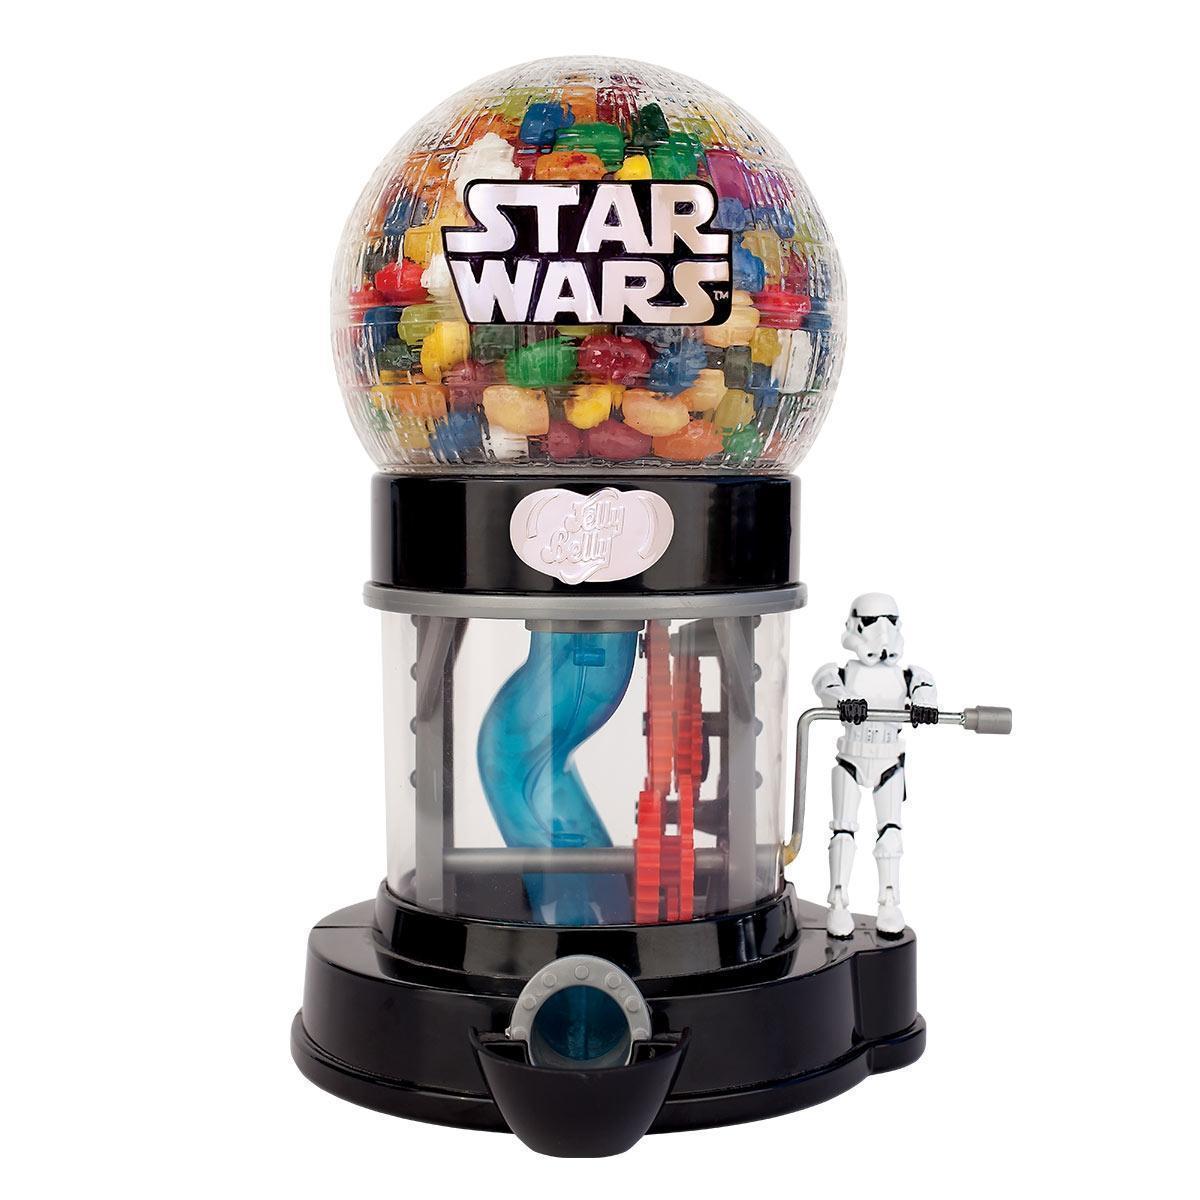 Star Wars Rogue One Jelly Belly Jelly Bean Dispenser Machine